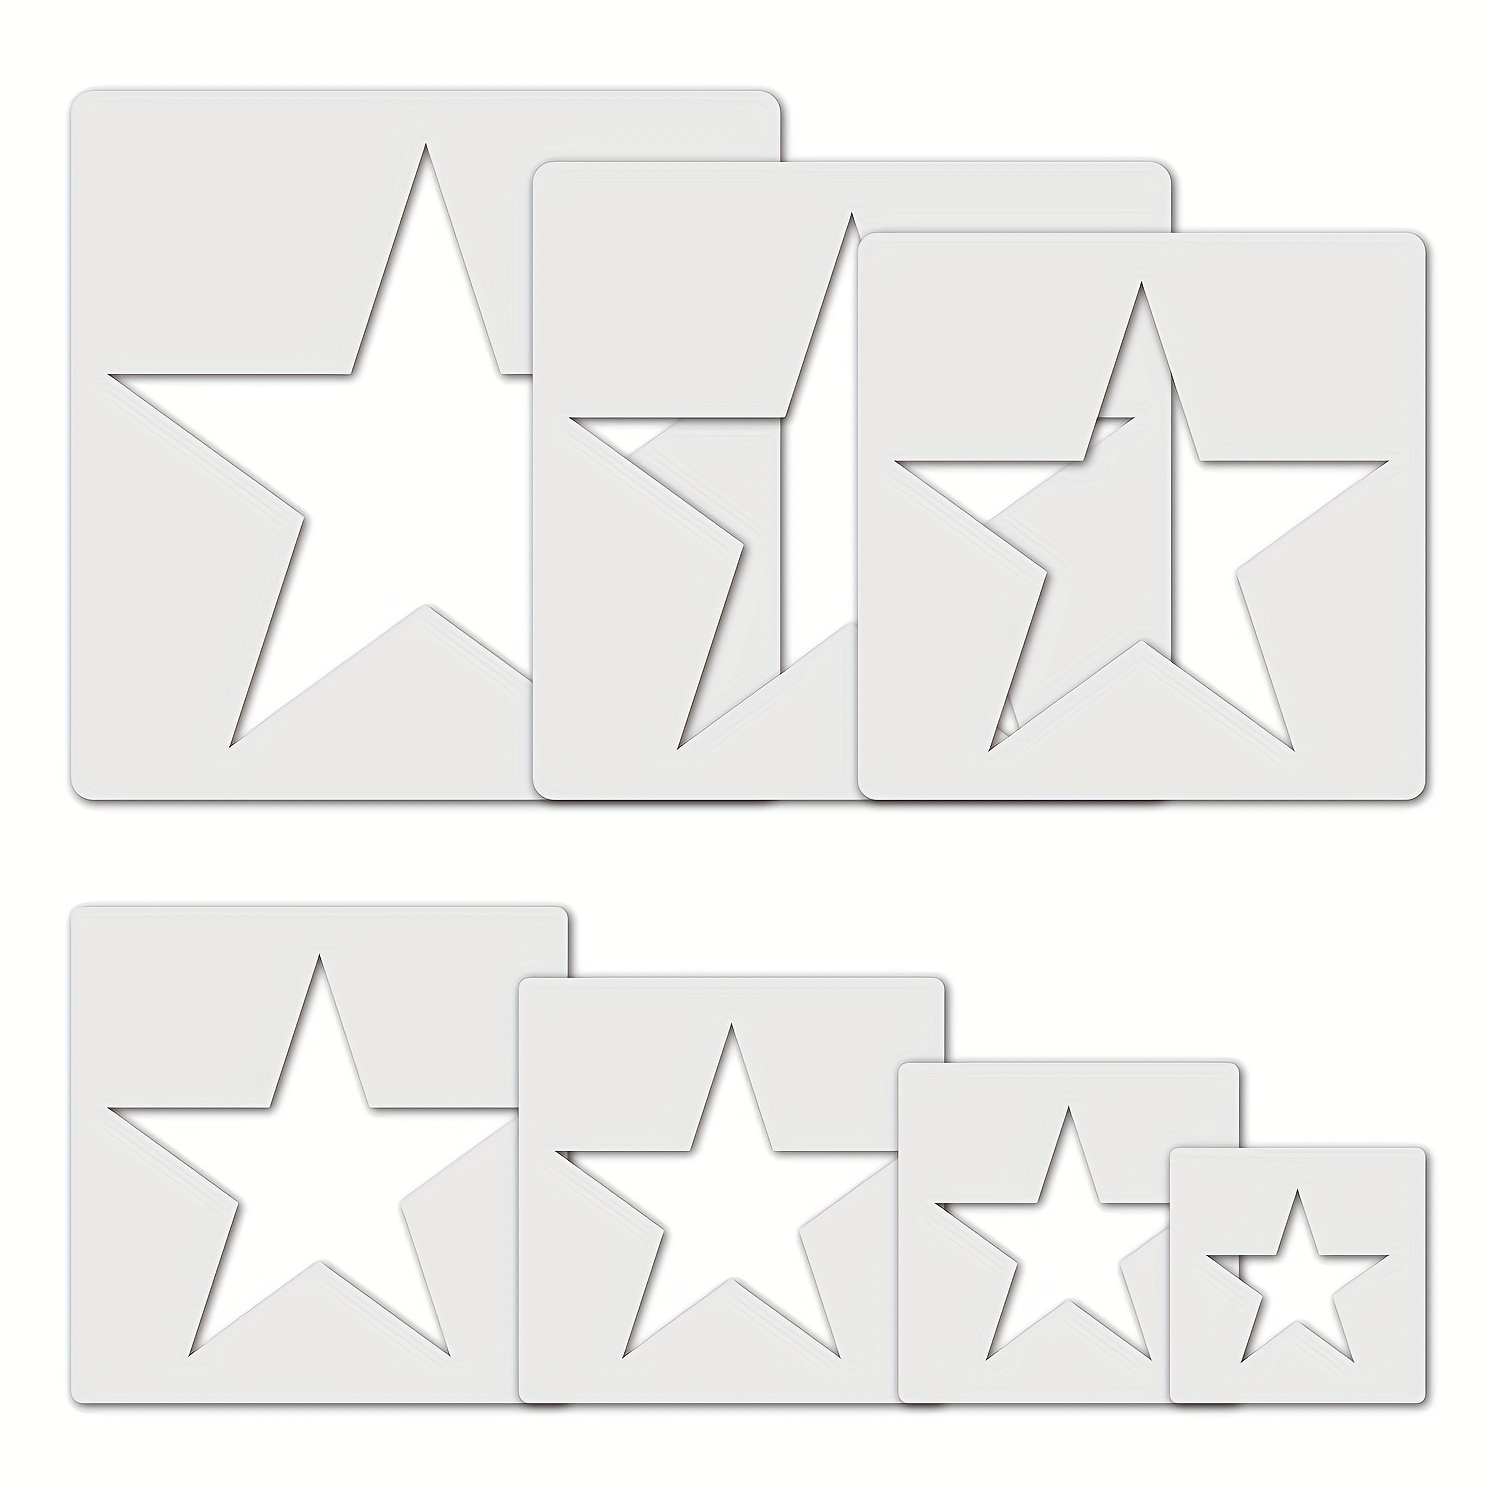 

8pcs Large Star Stencil, Star Stencils Different Sizes, Star Template, Large Star Stencil For Painting